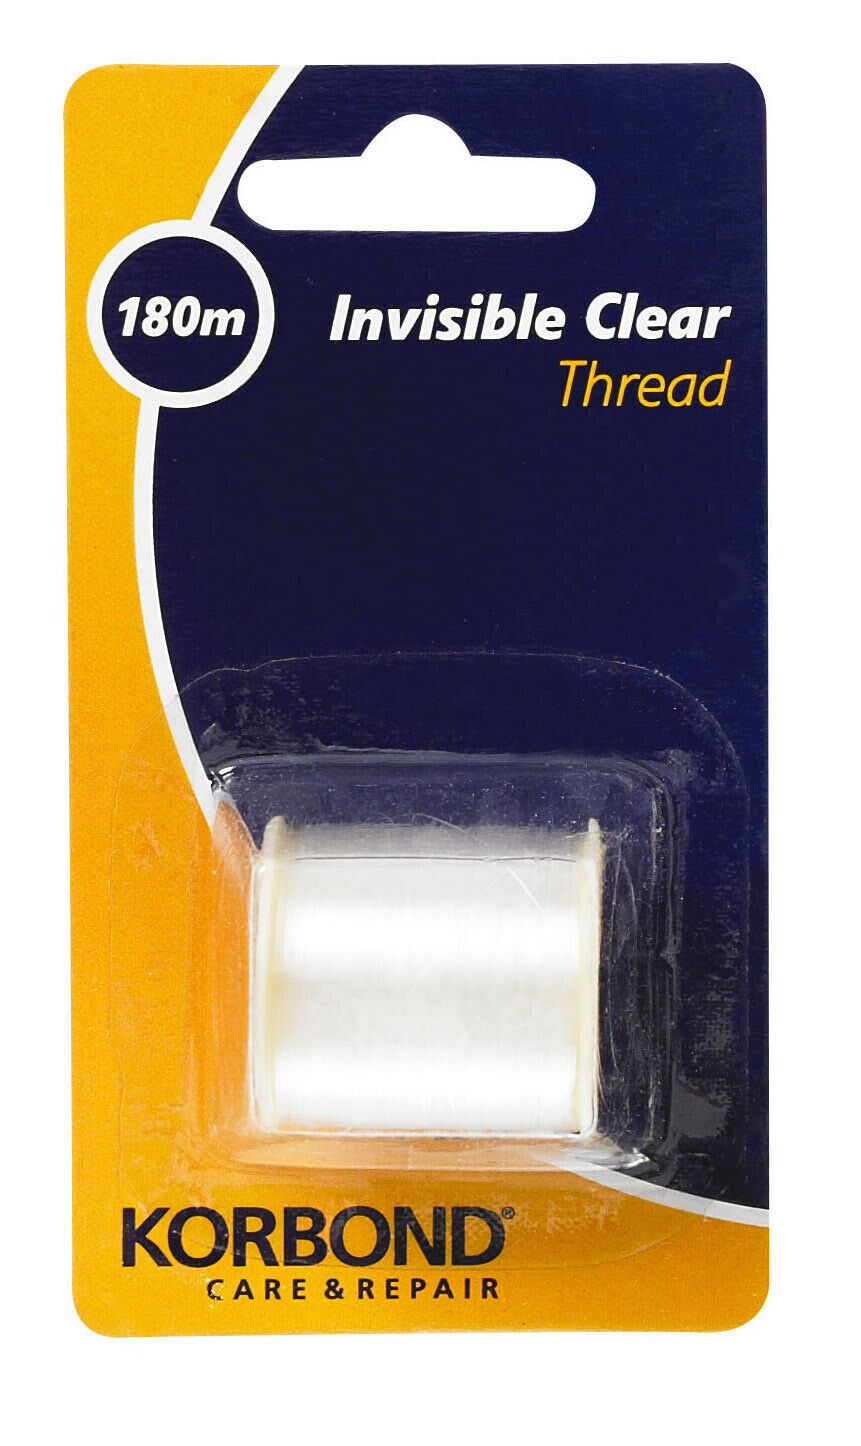 Korbond Invisible Clear Thread 180m Reel Sewing Beading Craft 